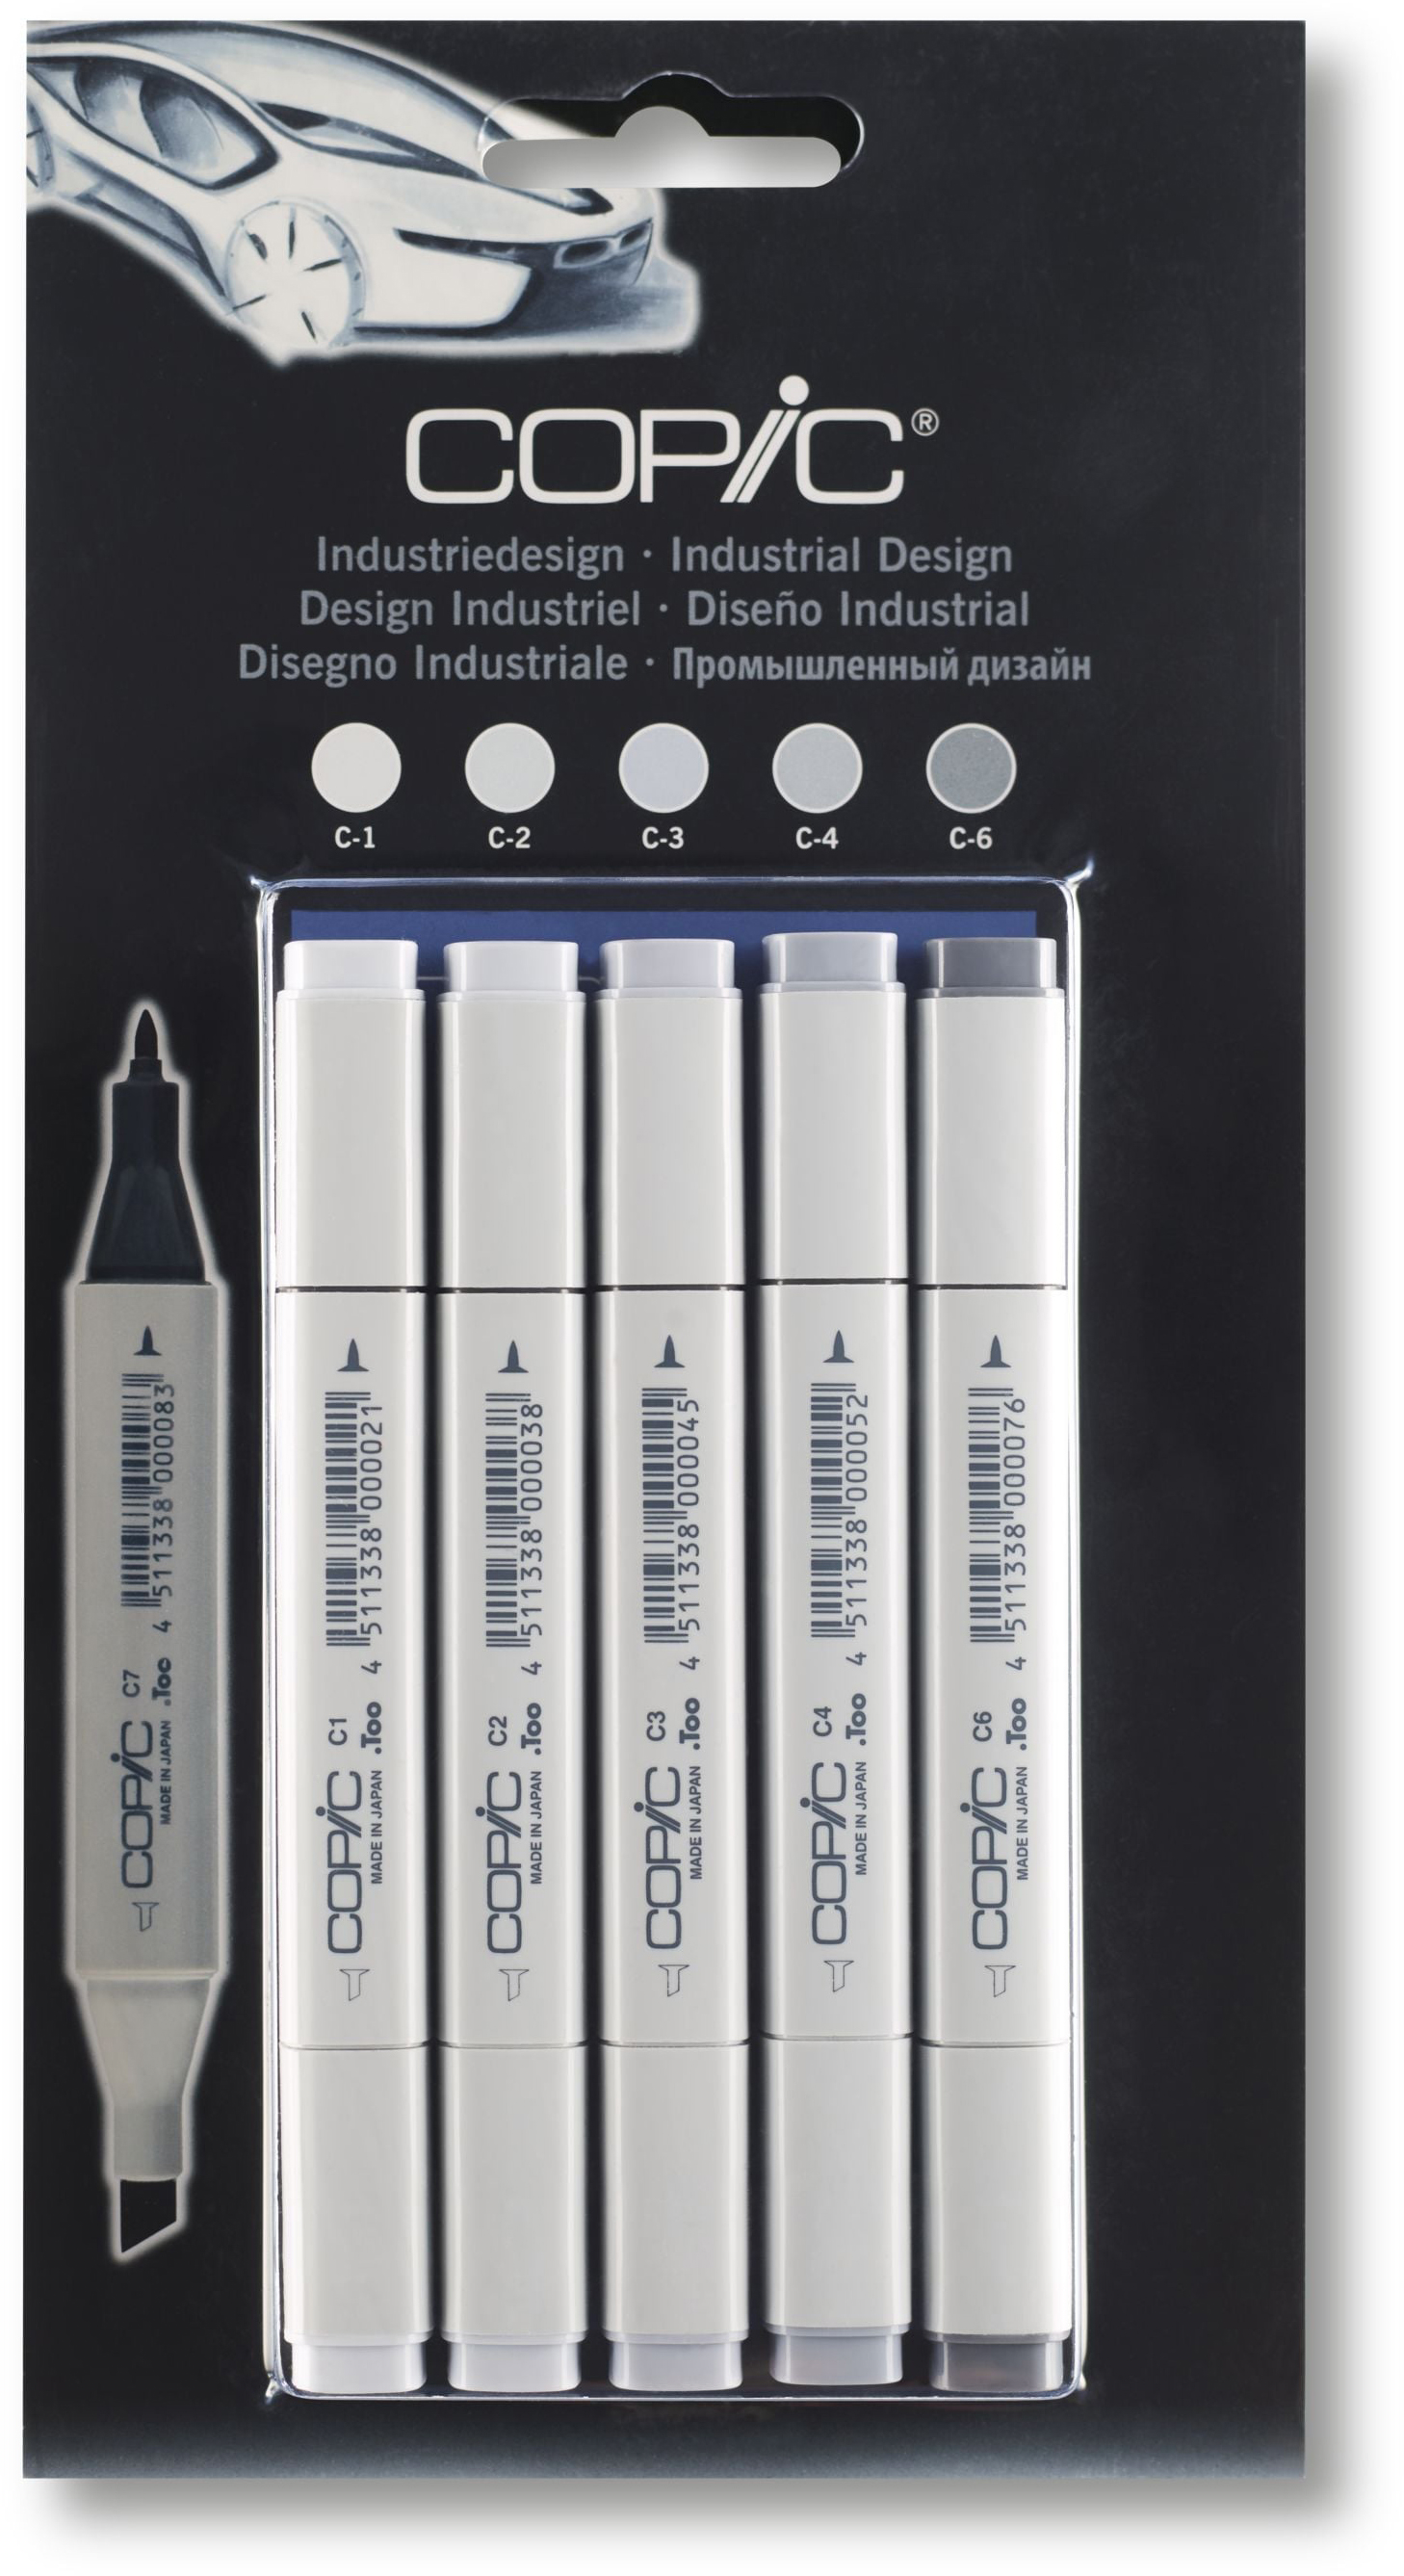 COPIC Marker Classic 20075566 grey Industriedesign, 5 pcs.